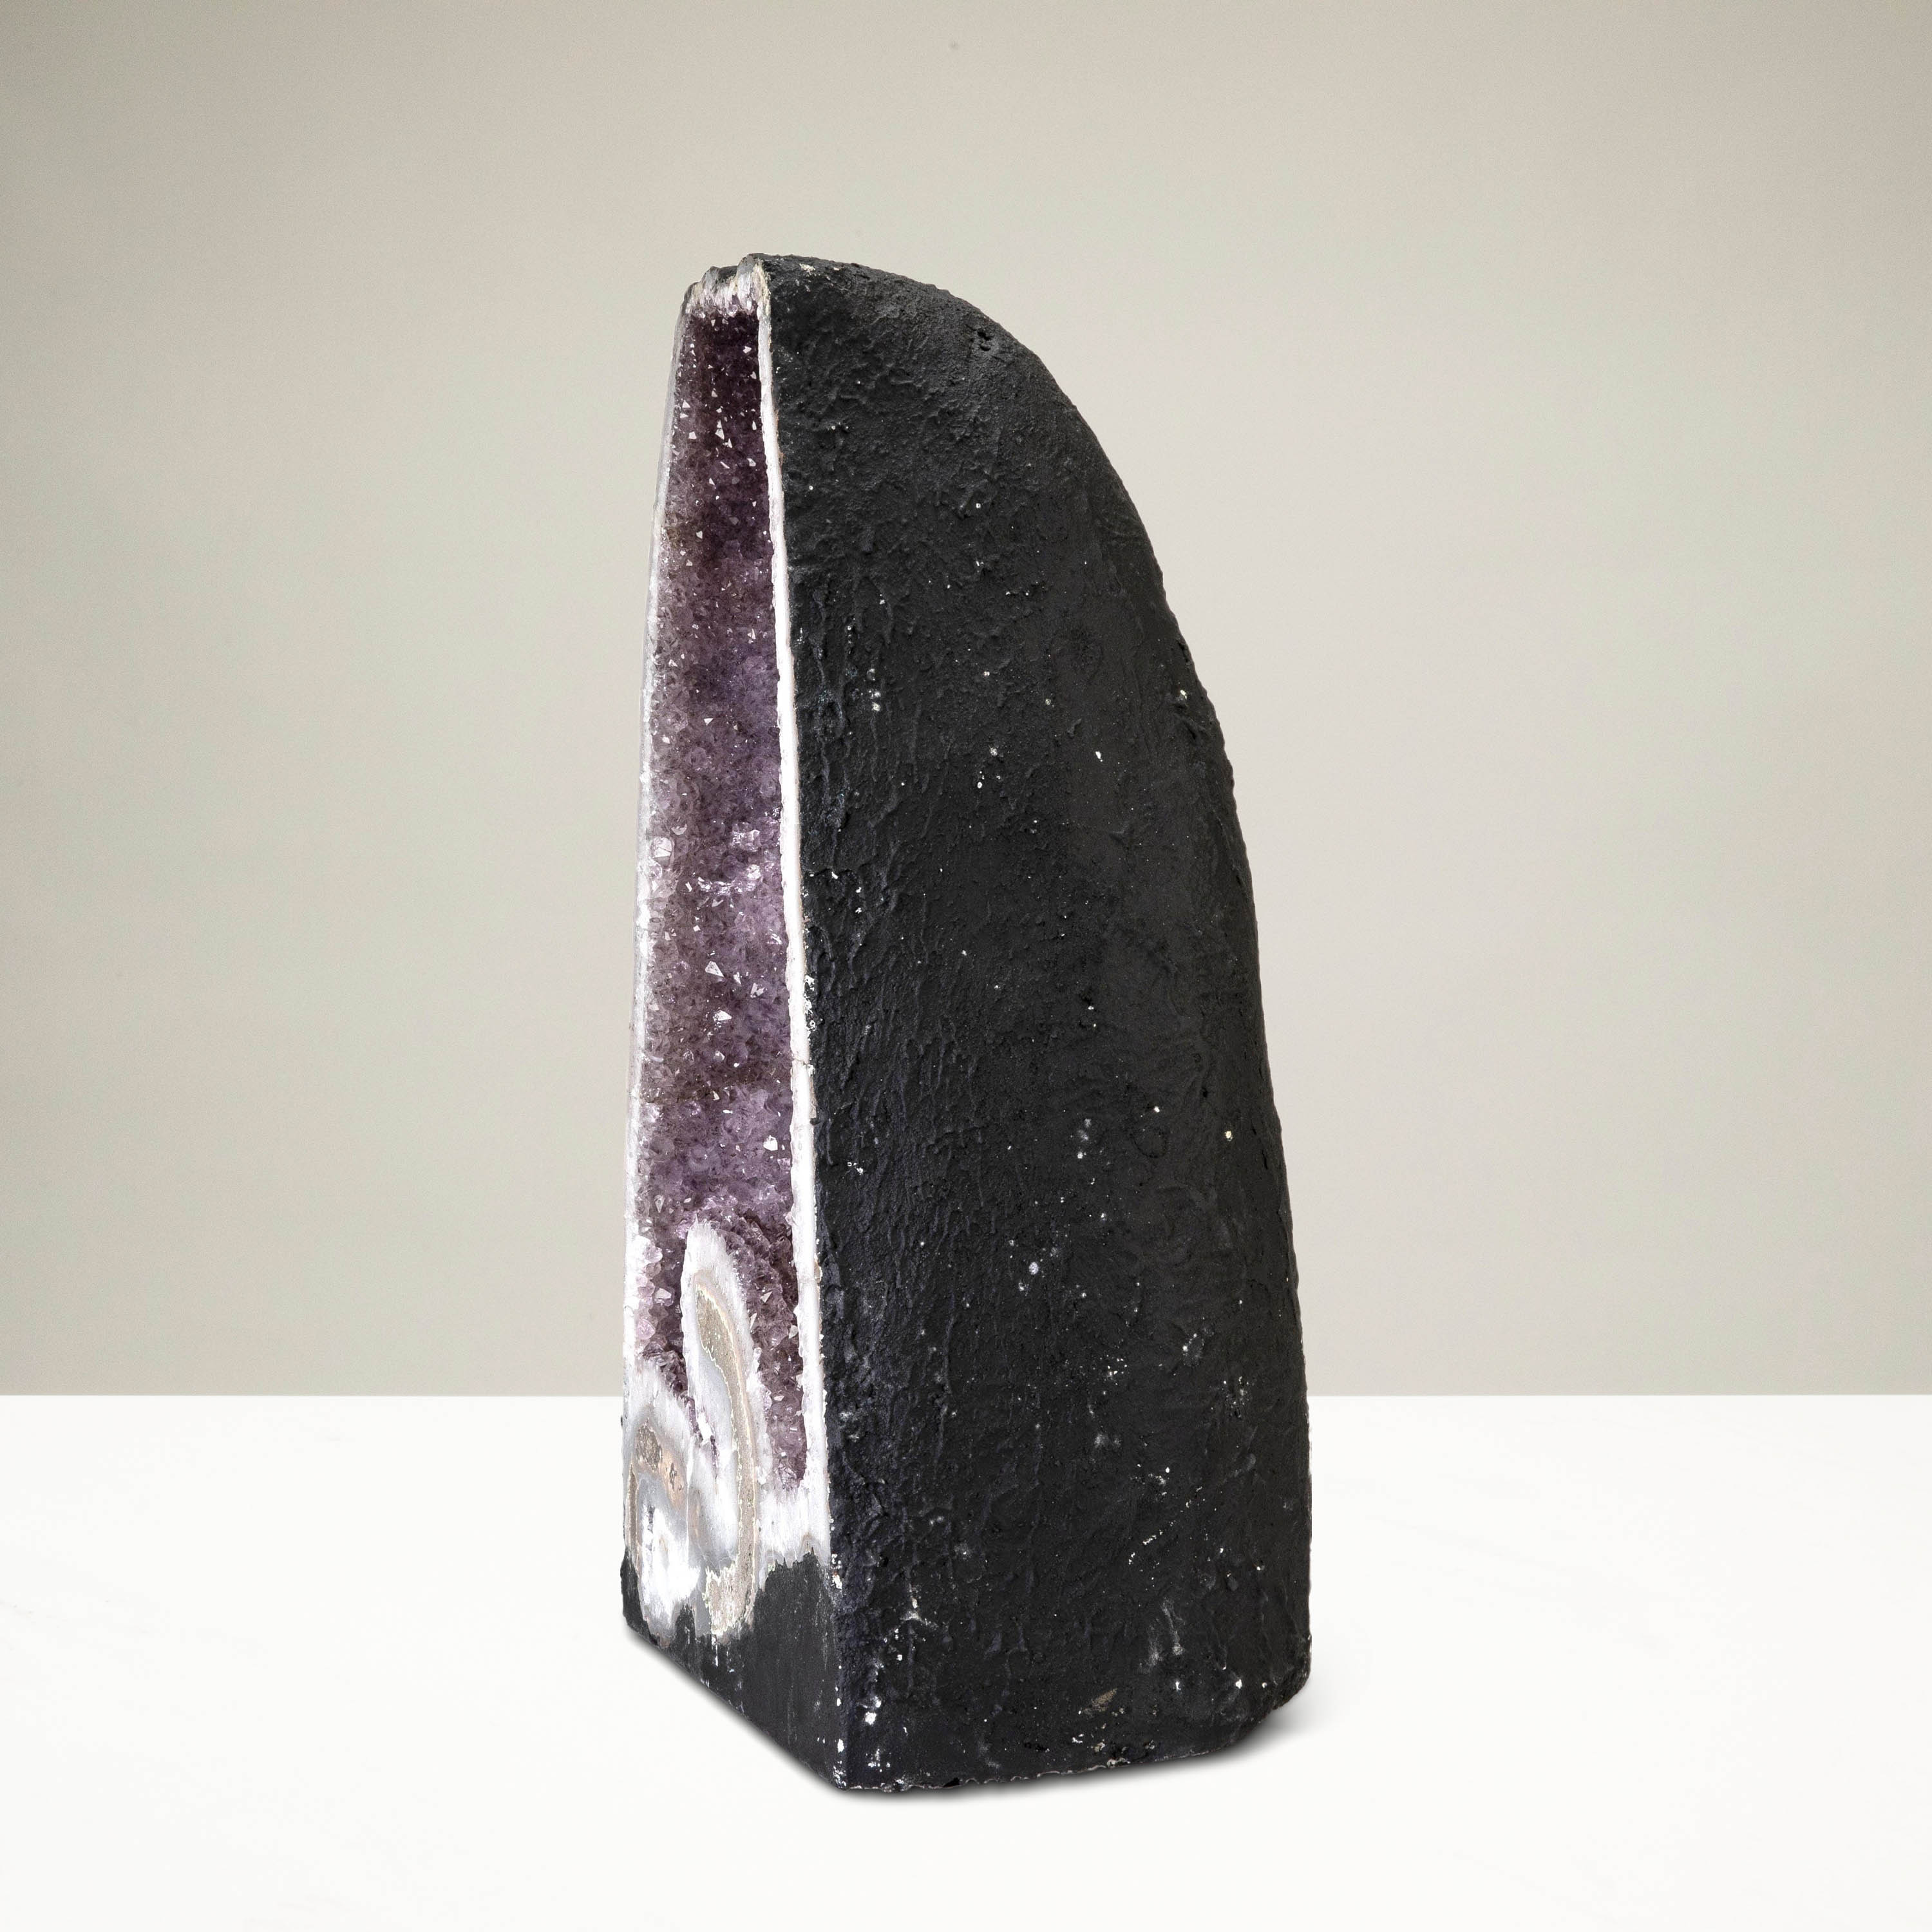 Kalifano Amethyst Natural Brazilian Amethyst Crystal Geode Cathedral - 20 in / 71 lbs BAG6200.001